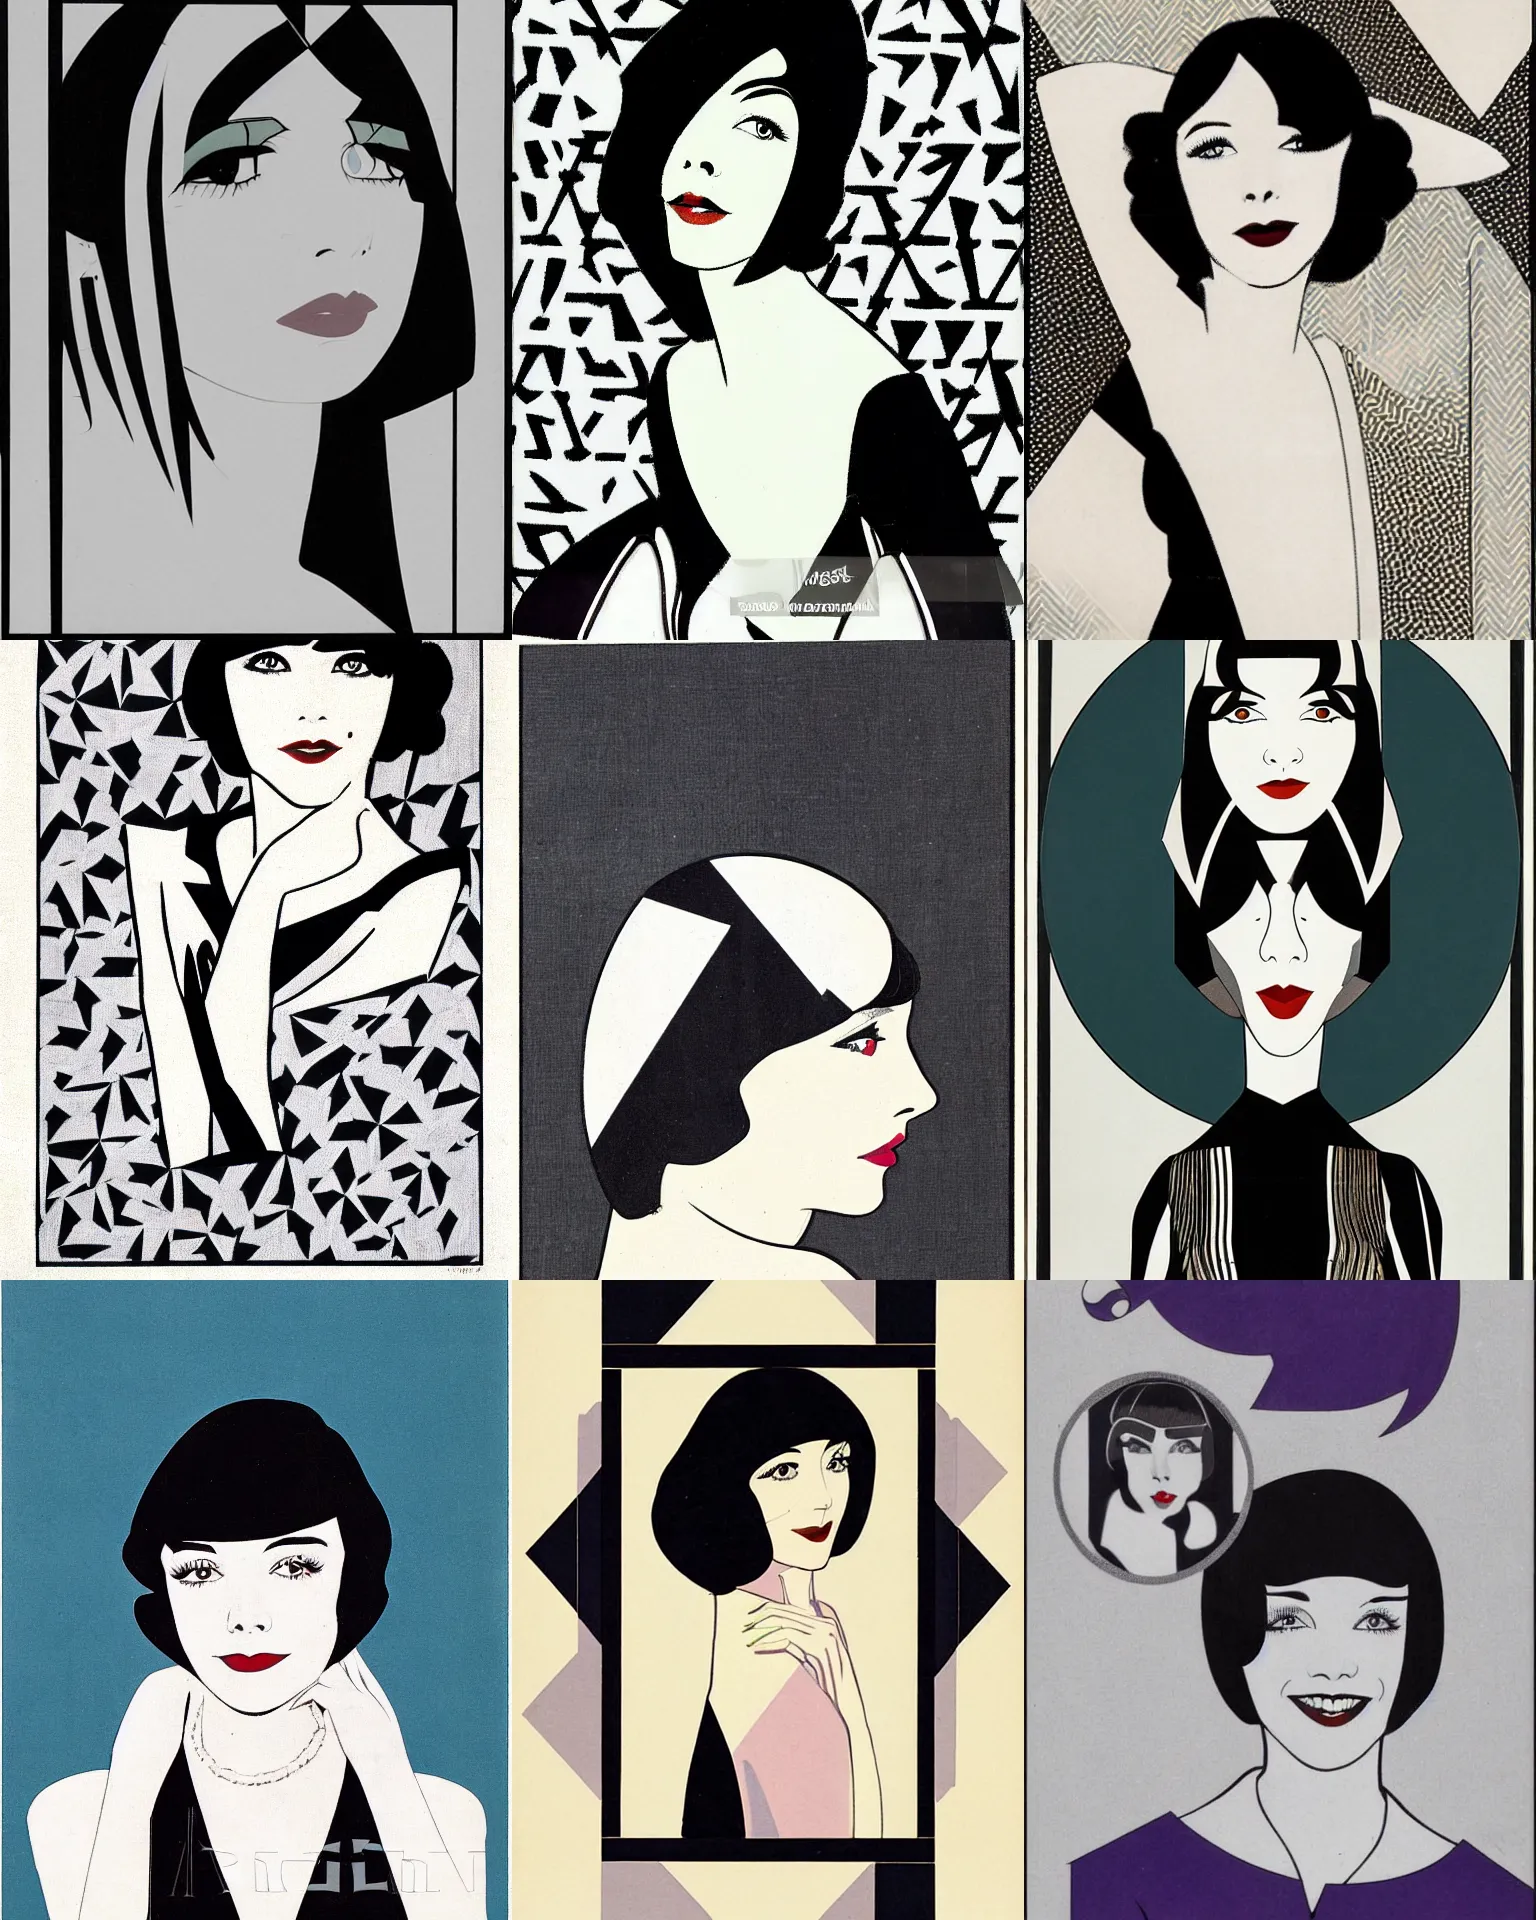 Prompt: Colleen Moore 25 years old, bob haircut, portrait by Patrick Nagel, 1920s, geometric patterned